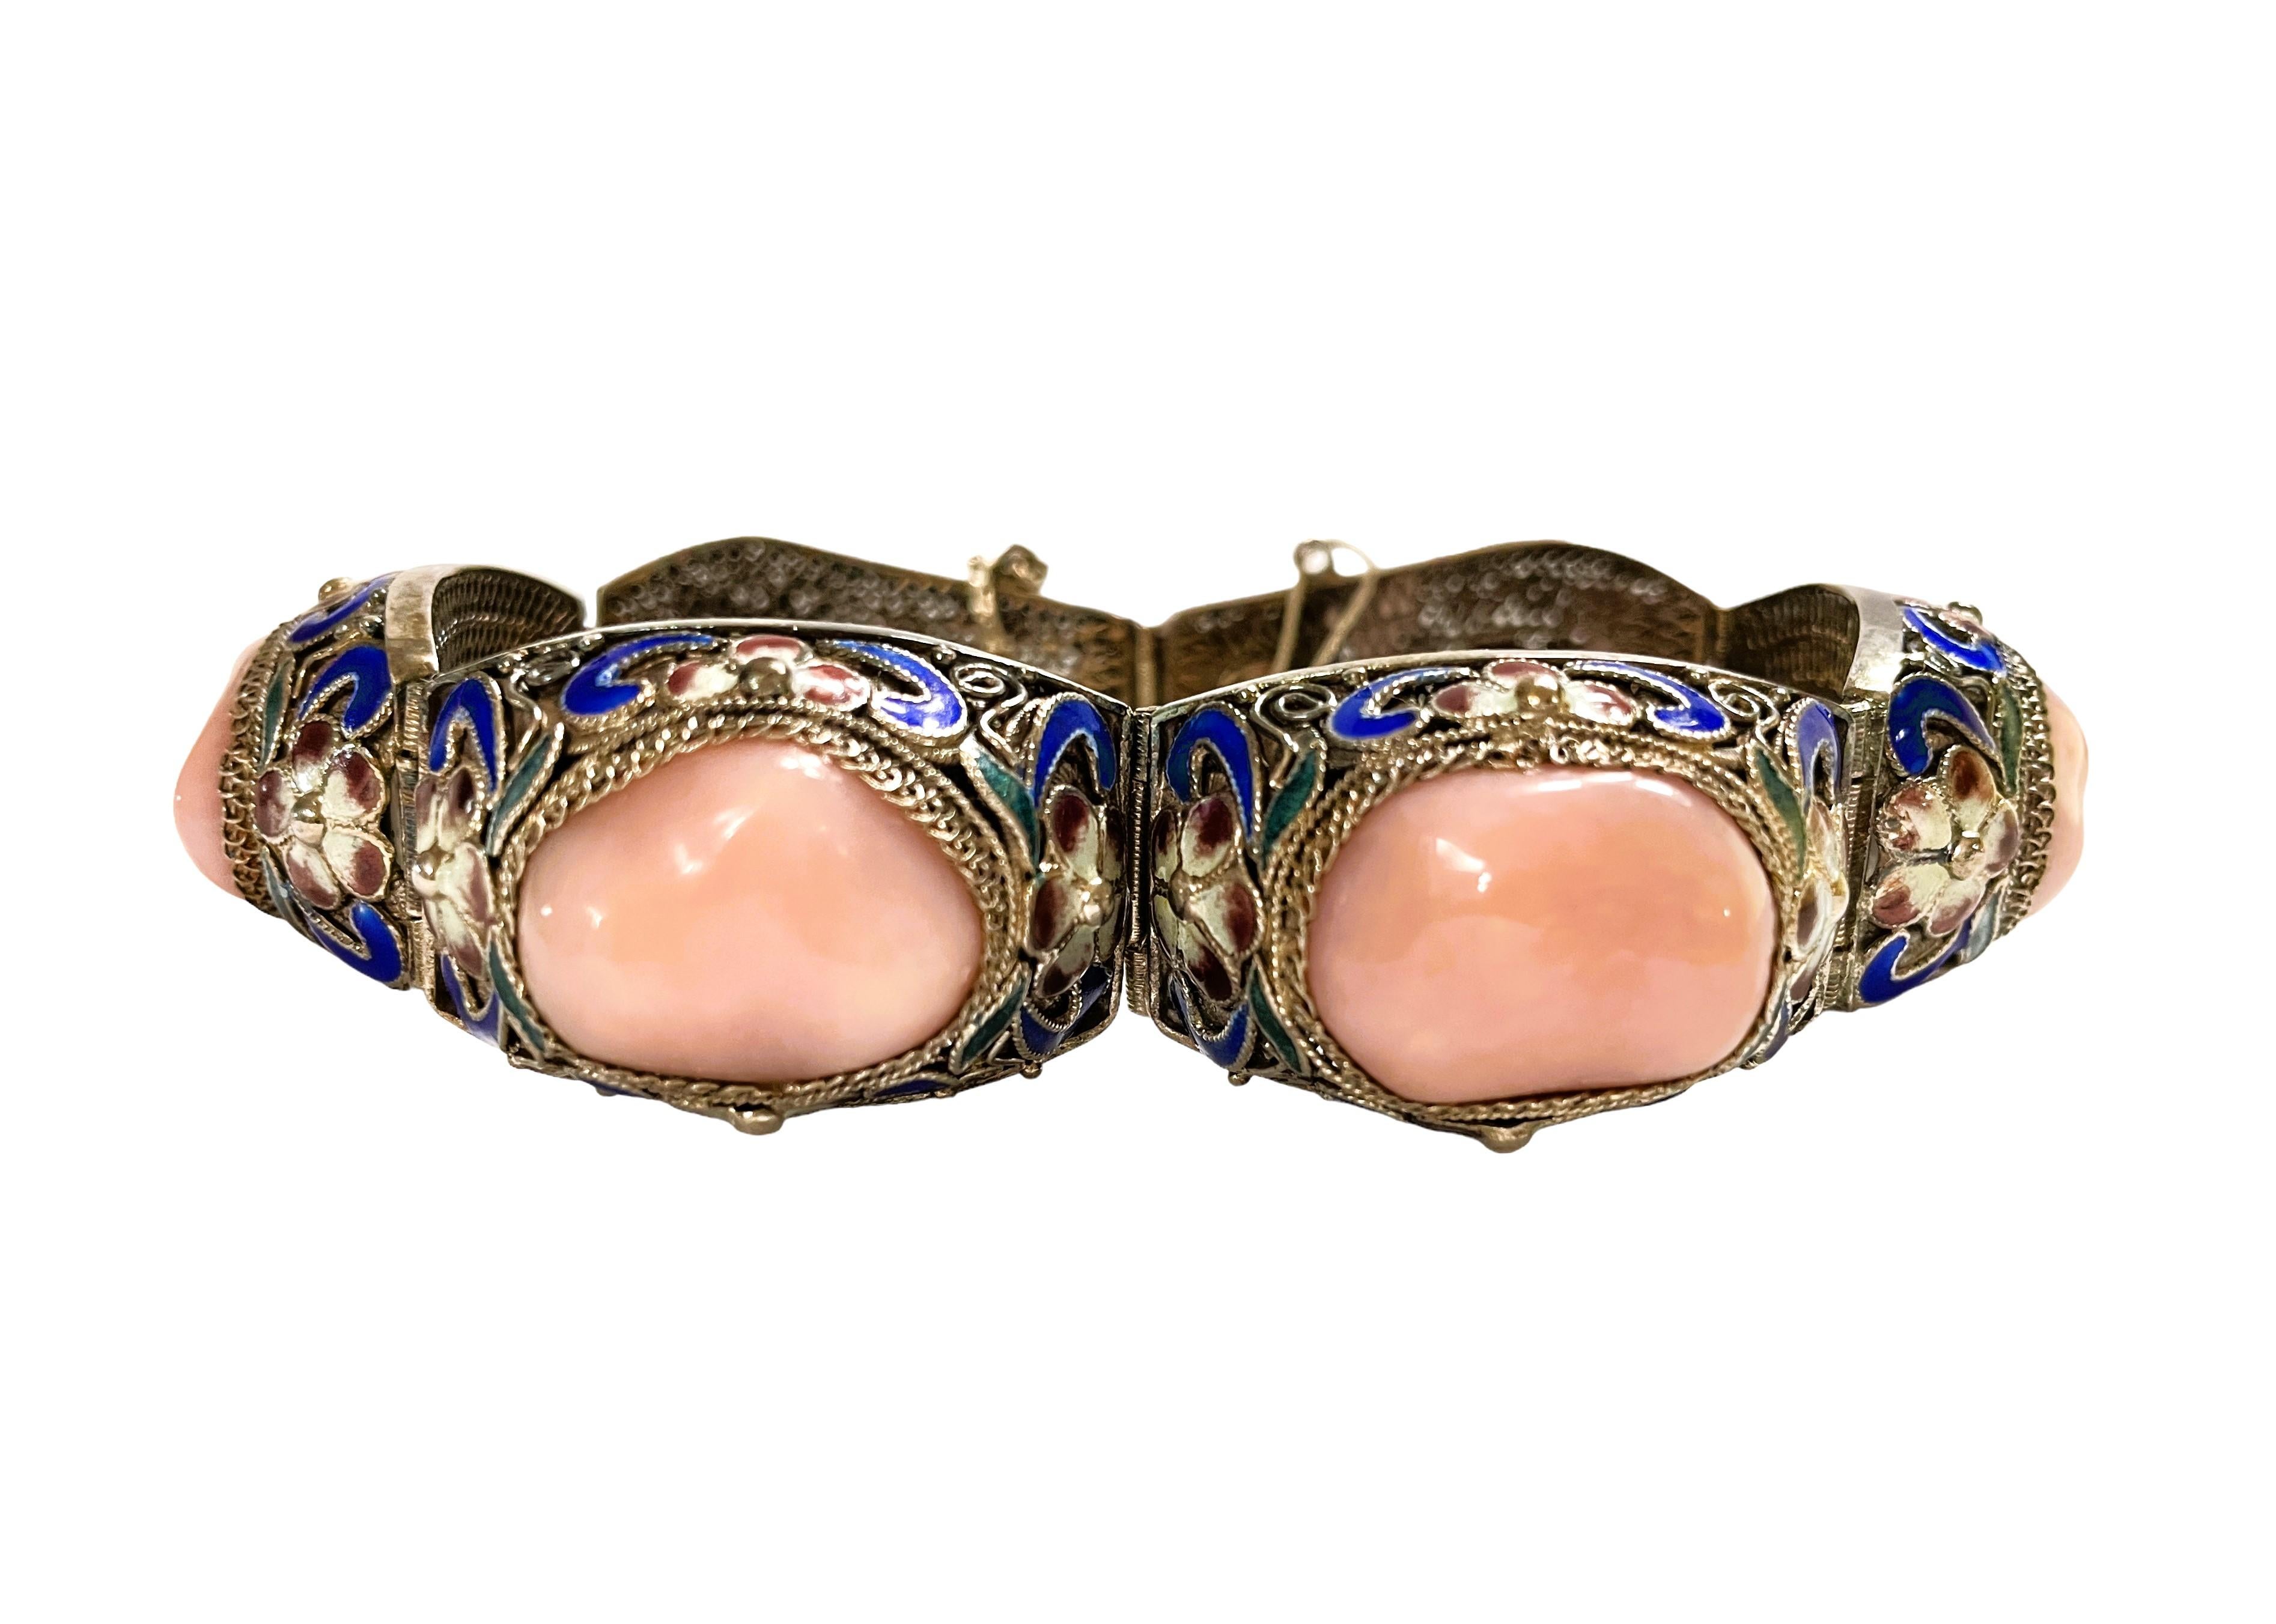 This is a gorgeous handmade bracelet.   It is Pre-Owned but in excellent condition.  It is a nice and heavy, well-made bracelet weighing 55.84 grams.   It is stamped 925 near the clasp.  It is an Antique Chinese filigree silver bracelet comprising